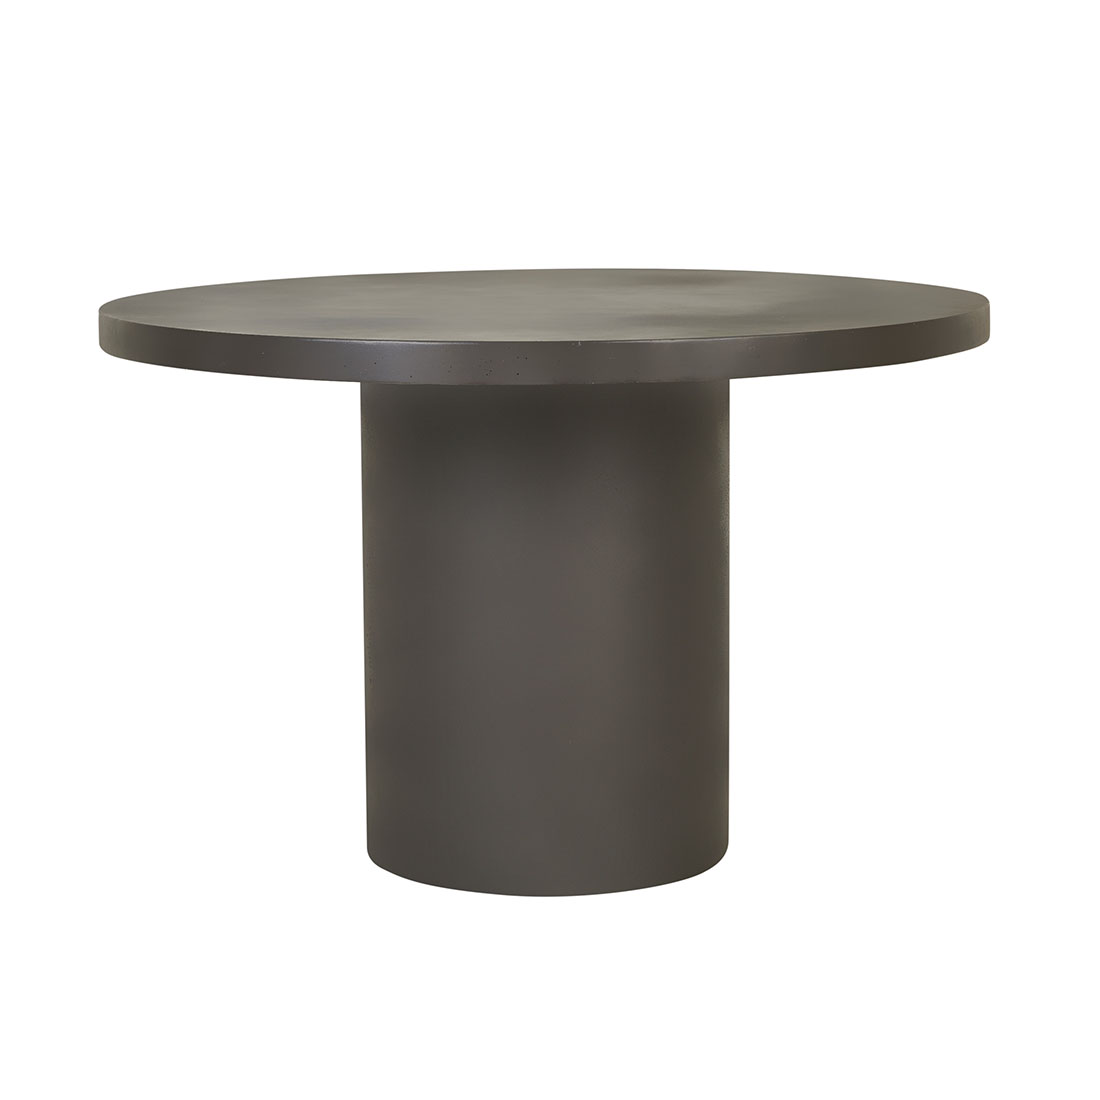 Petra Round Dining Table image 5